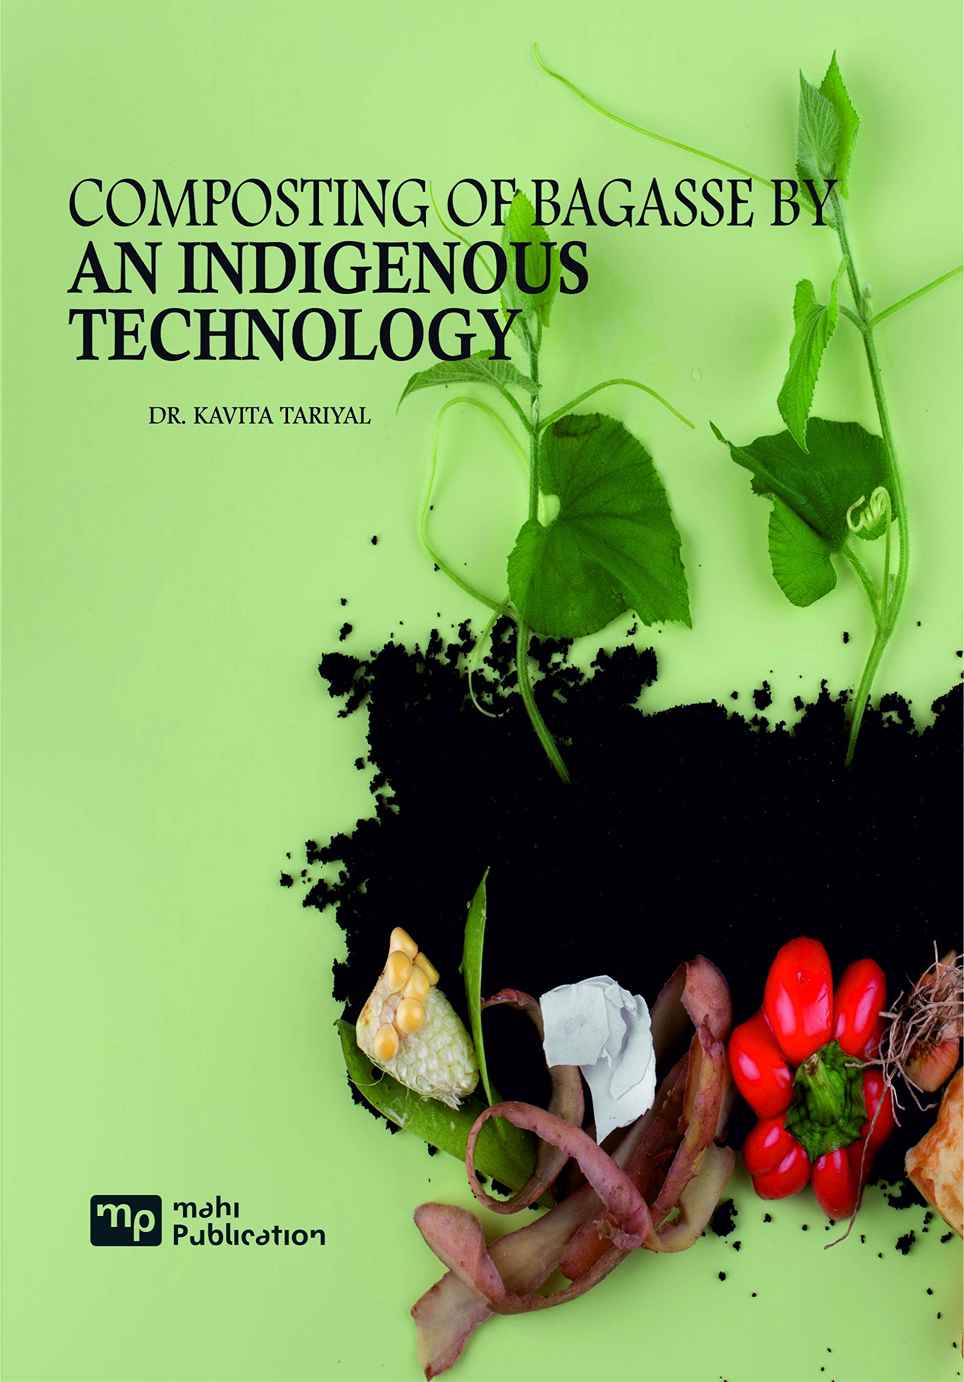 Composting of Bagasse by an Indigenous Technology